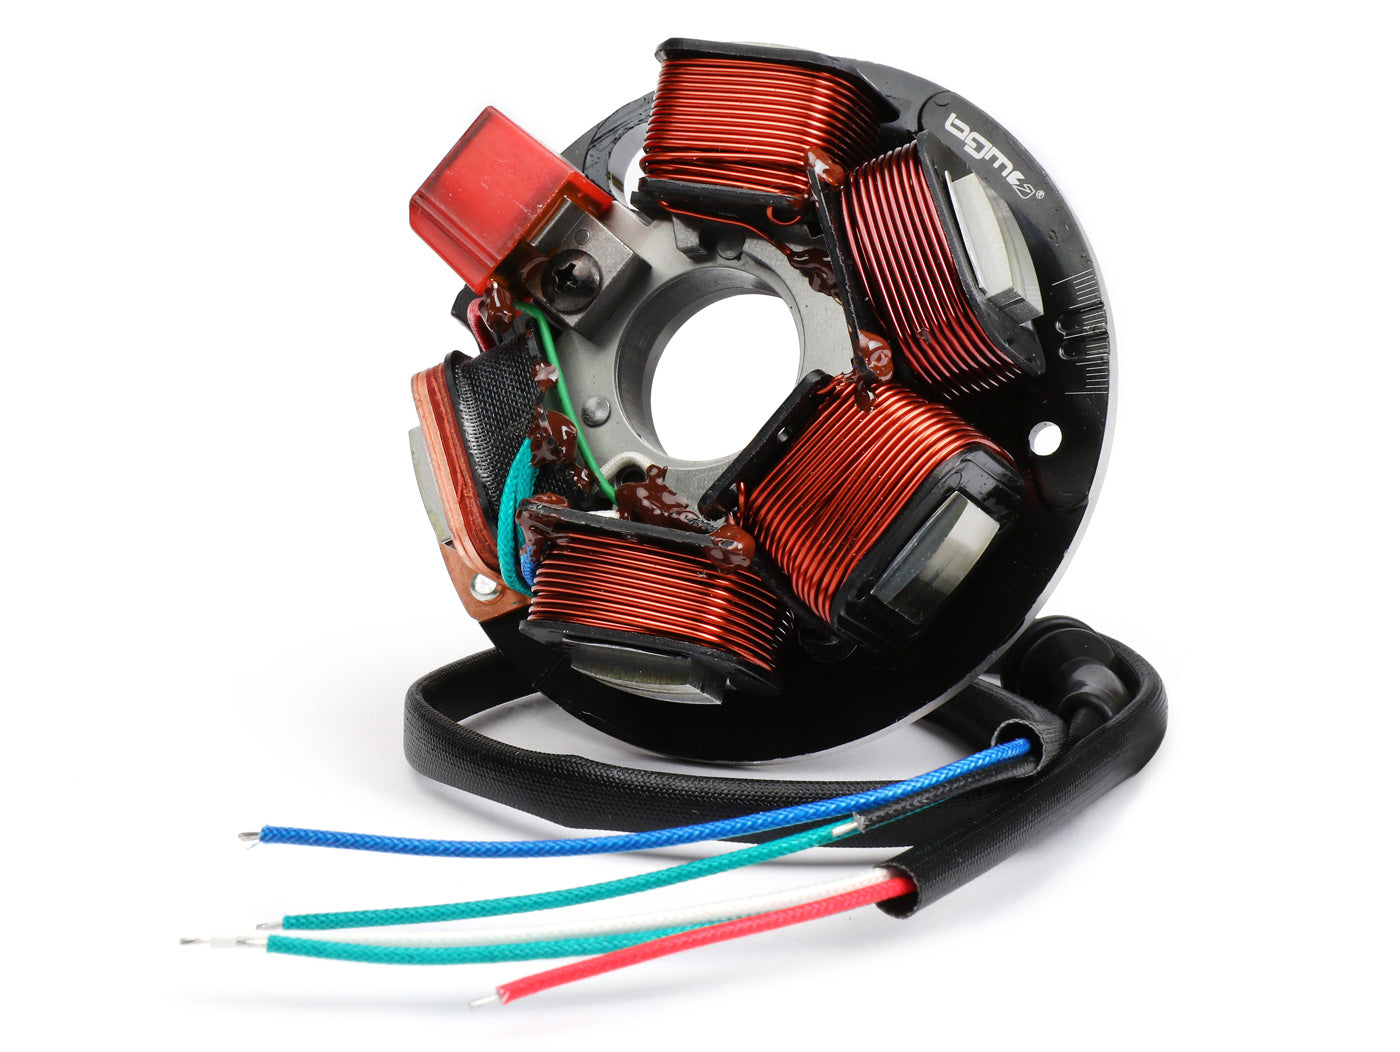 Vespa BGM PRO PK XL Conversion V50/PV Stator Plate - 5 coils, 6 cables - for converting Smallframe to electronic ignition